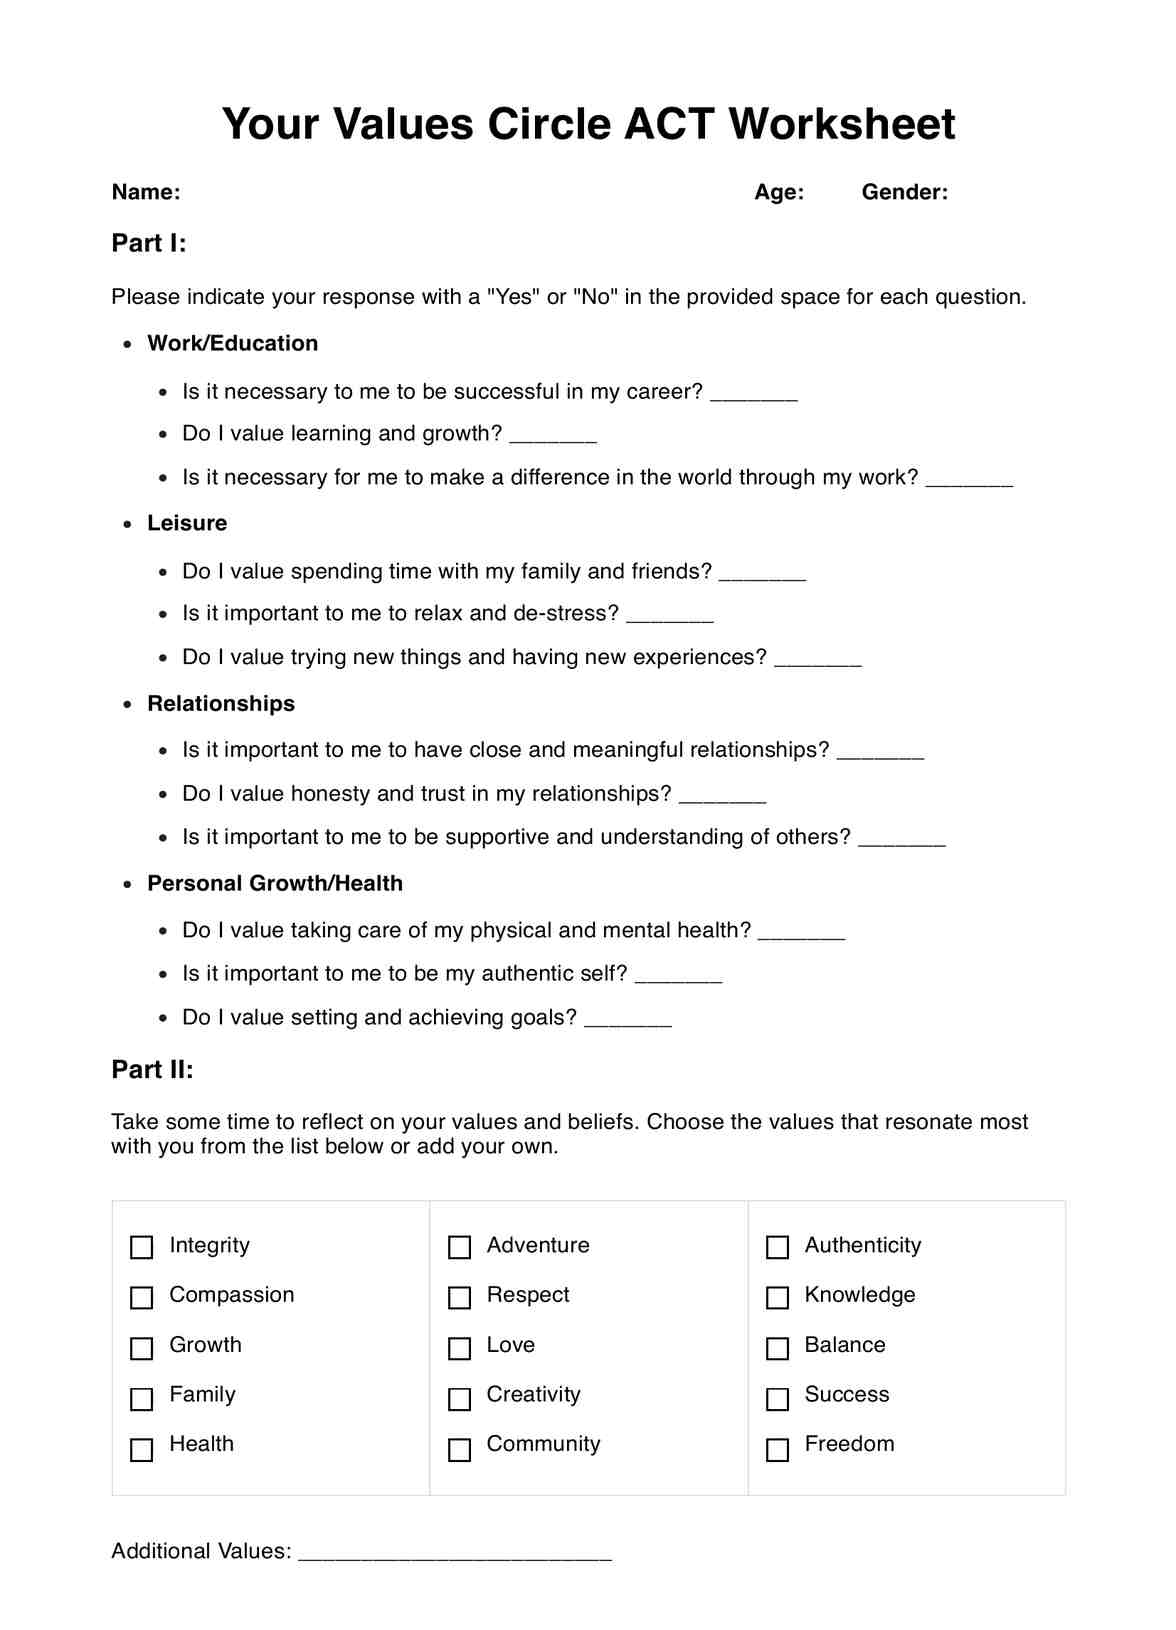 Your Values Circle ACT Worksheet PDF Example